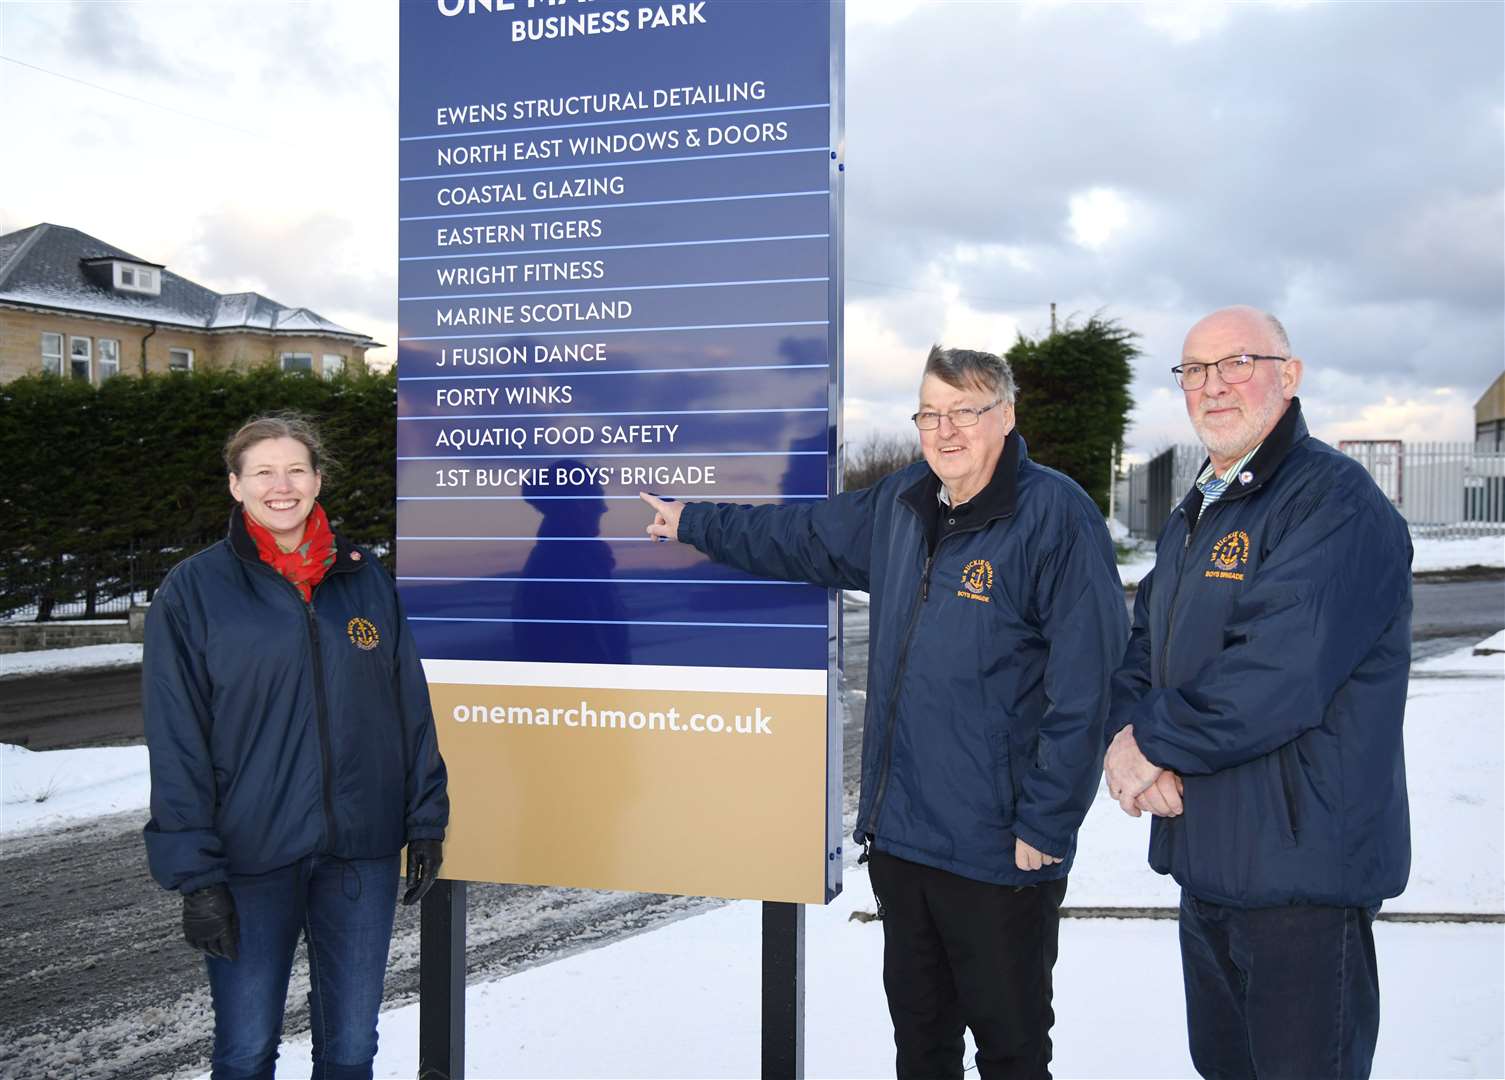 Looking forward to moving to One Marchmont Business Park are (from left) helper Laura Taylor, Company Captain Alan McIntosh and officer Grant Stewart. Picture: Beth Taylor